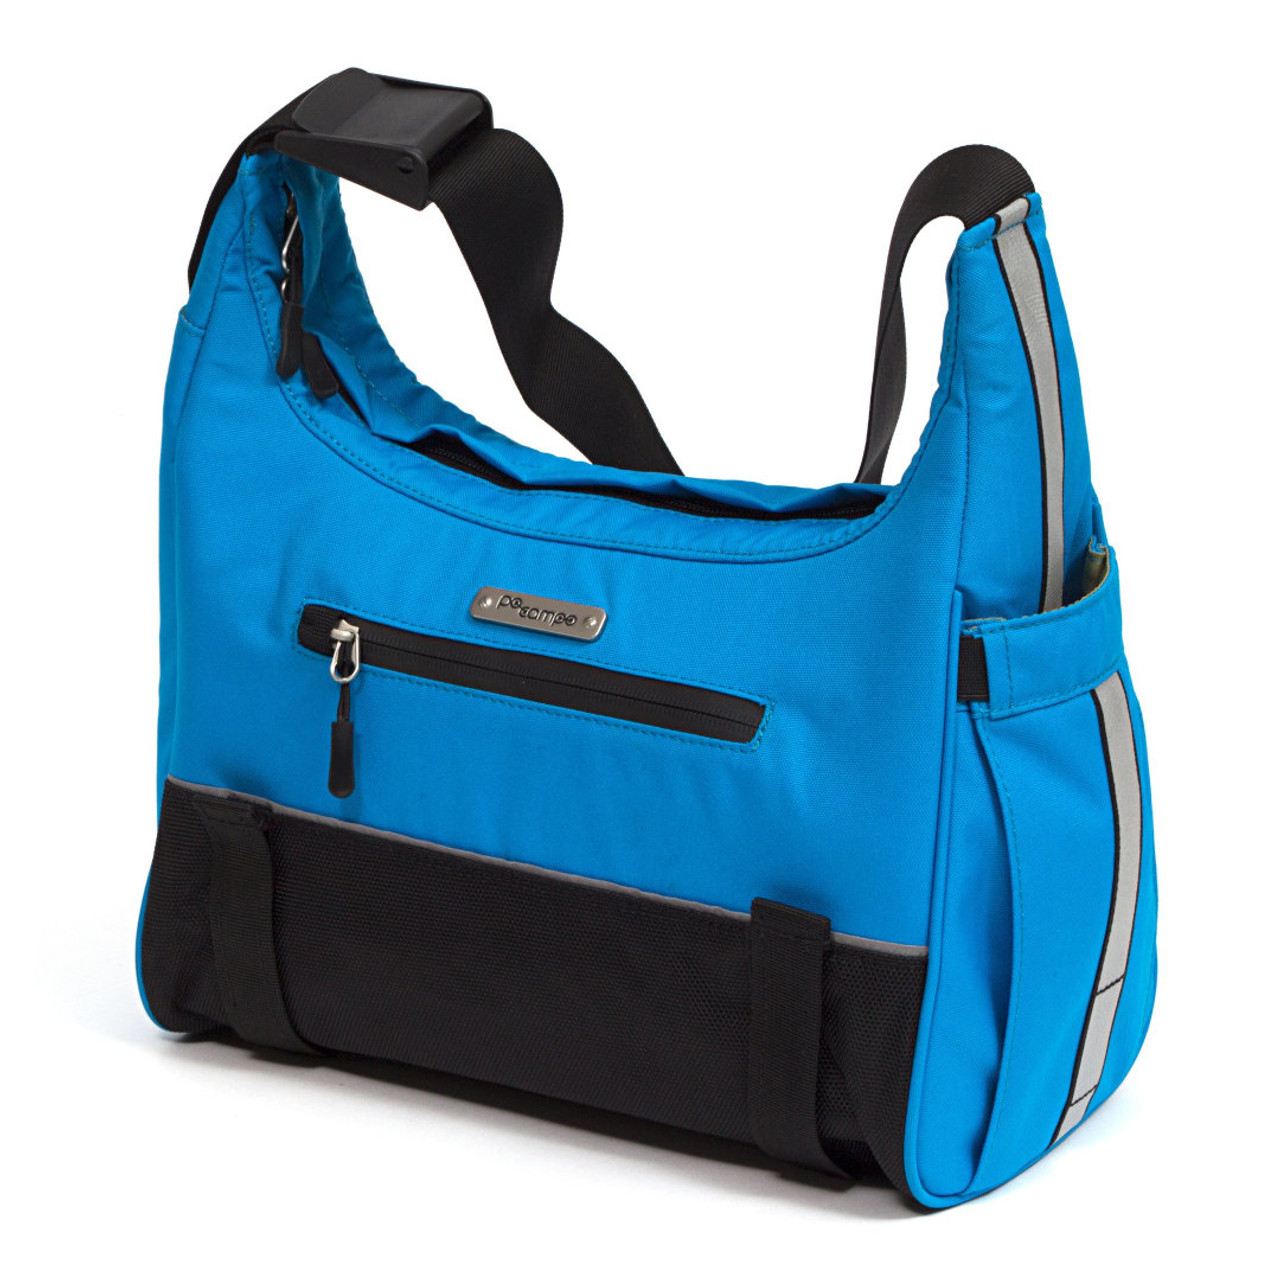 How do you style your bright blue bags?